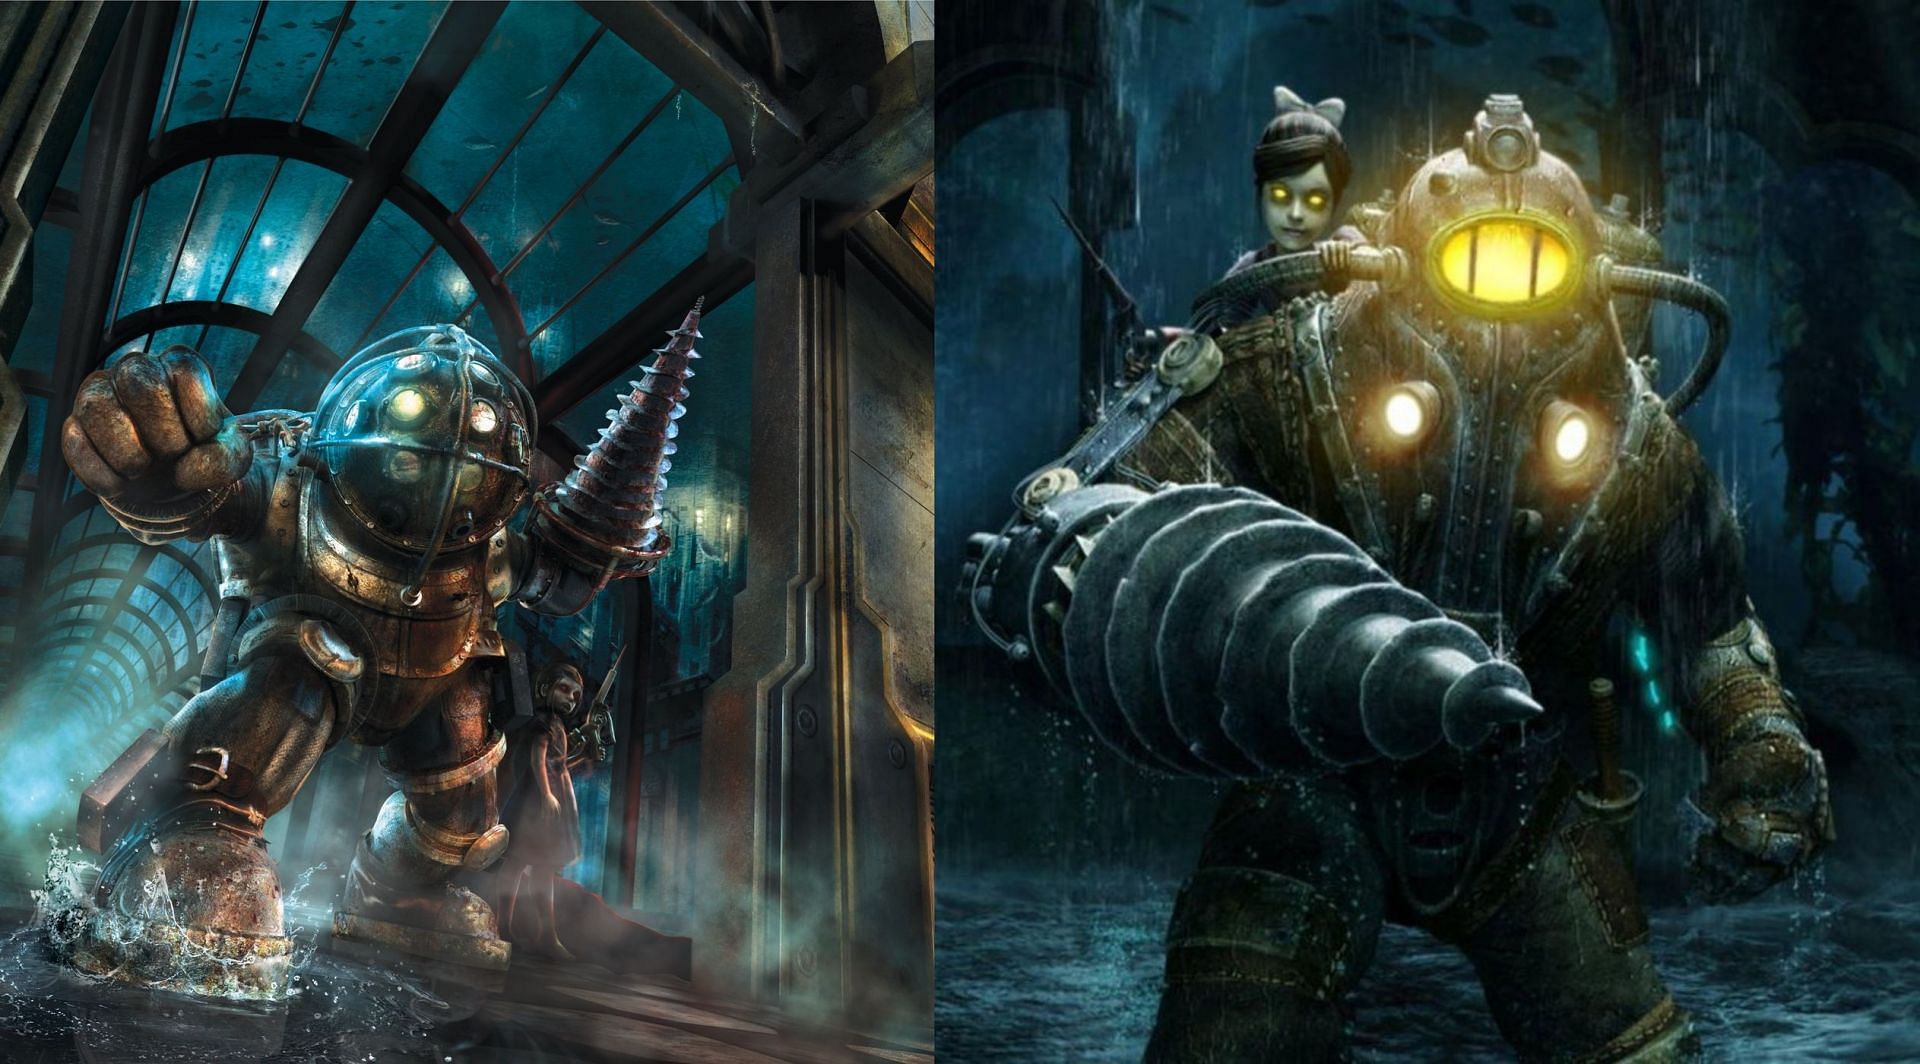 Little Sisters and Big Daddies in BioShock (Image via Netflix and 2K Games/Take-Two Interactive)